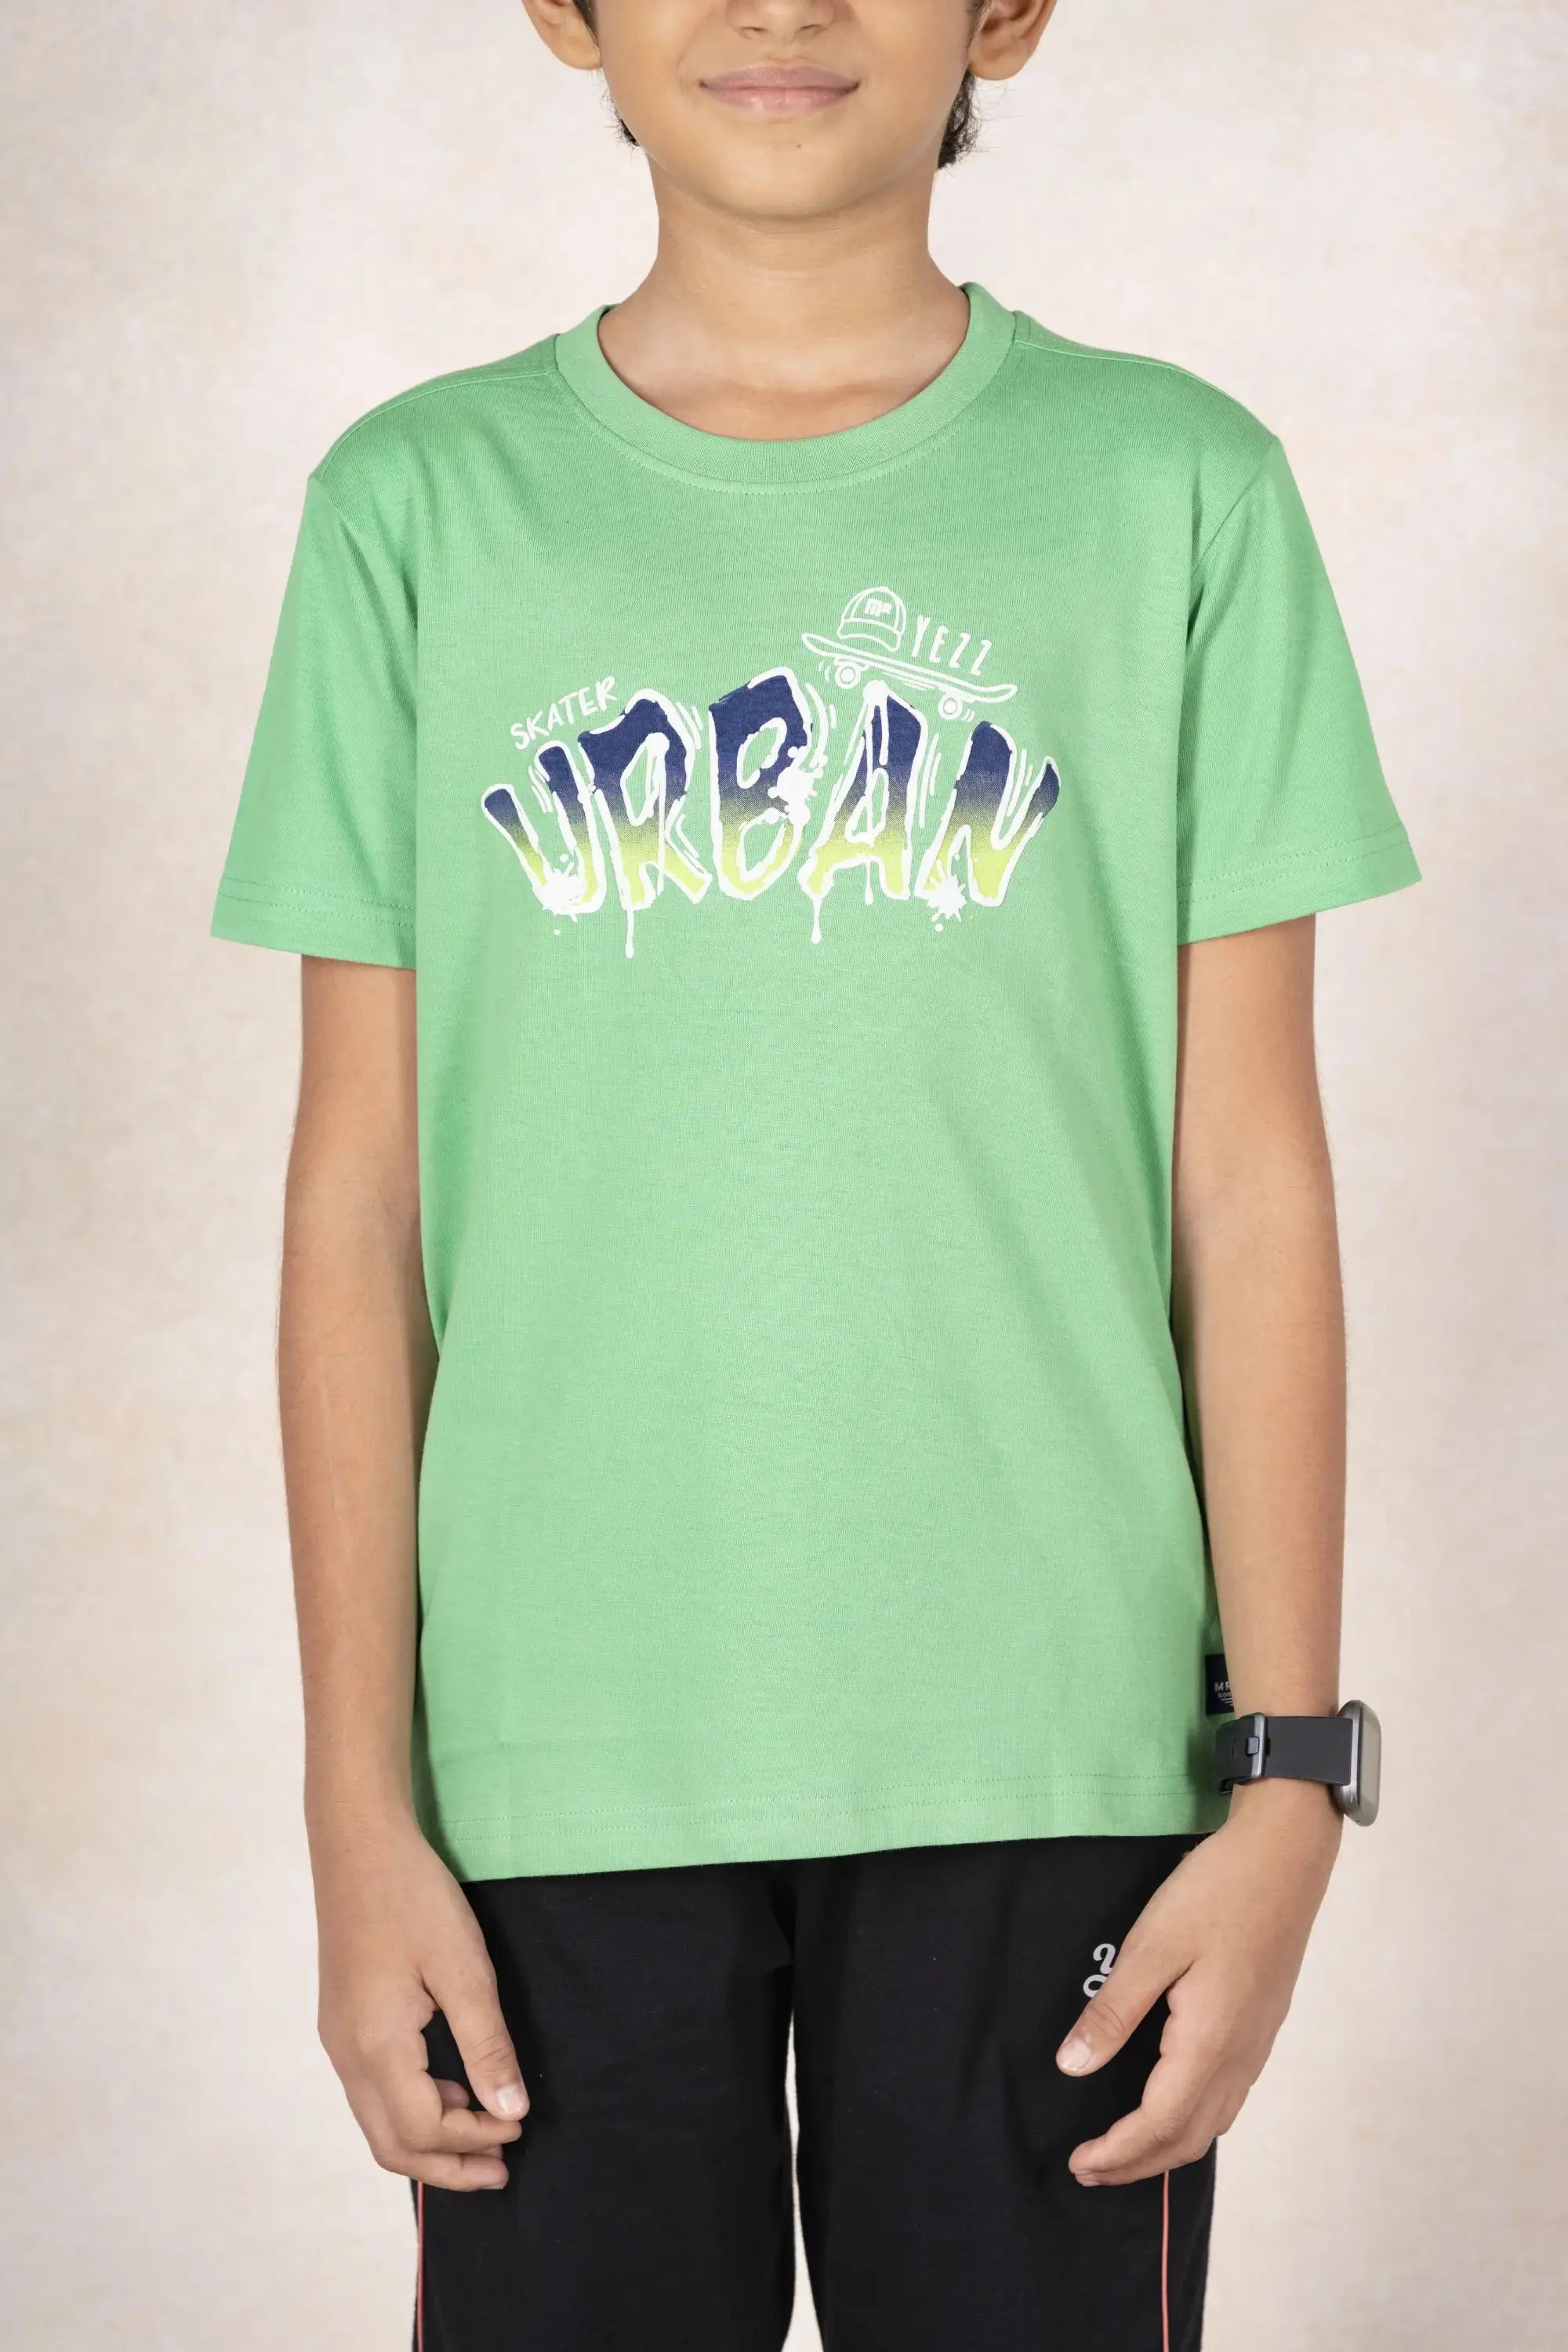 Boys Round Neck T-Shirt MR YEZZ #color_Green Ivy